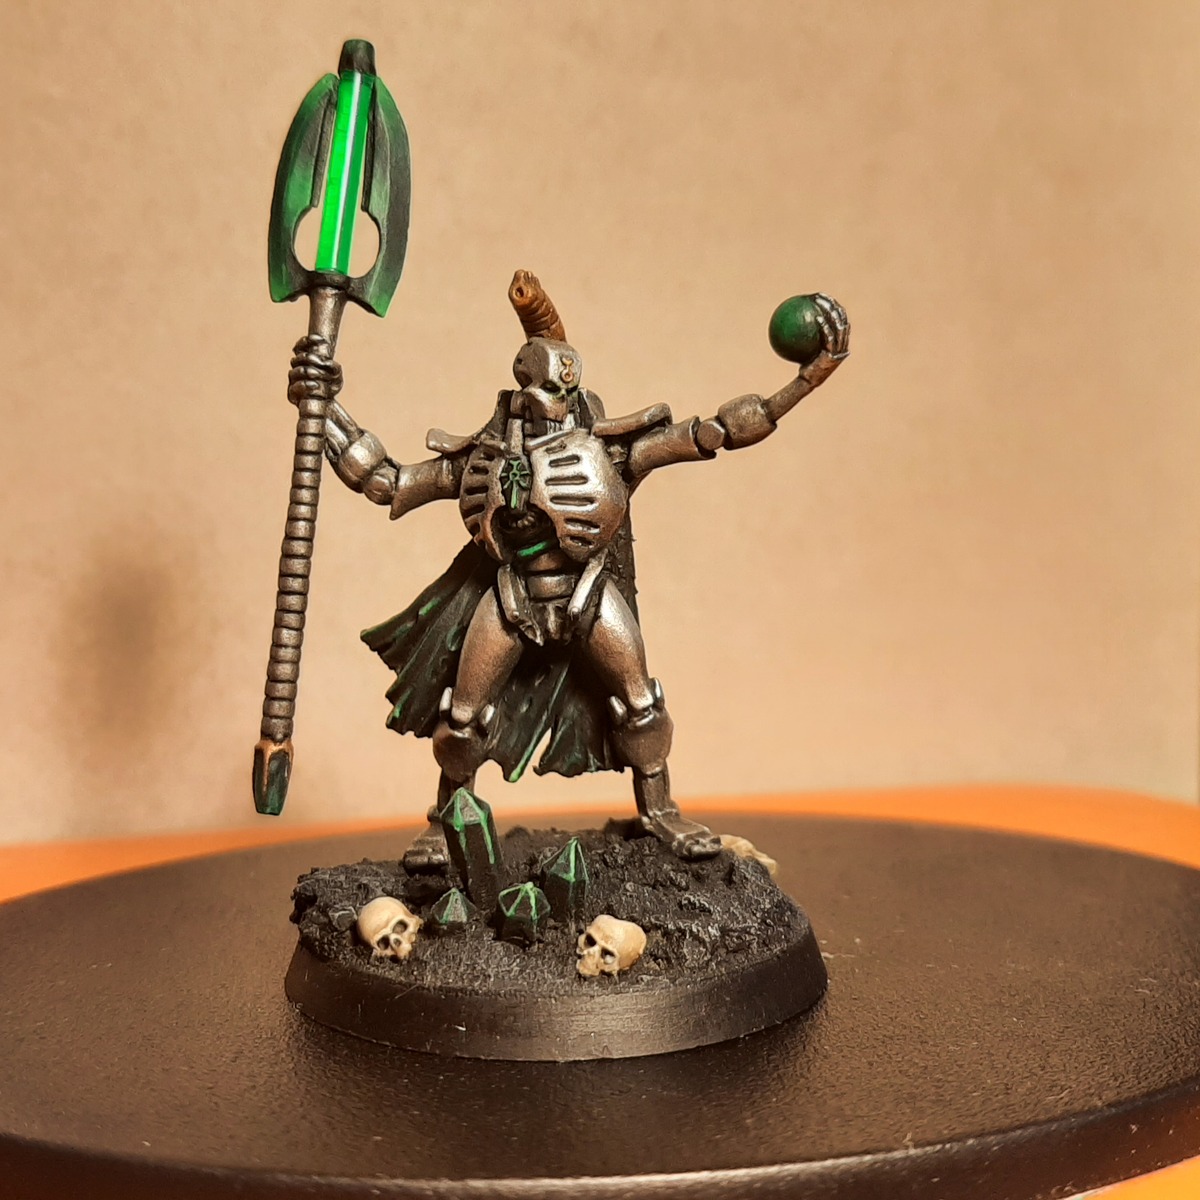 Necron Lord with resurrection orb